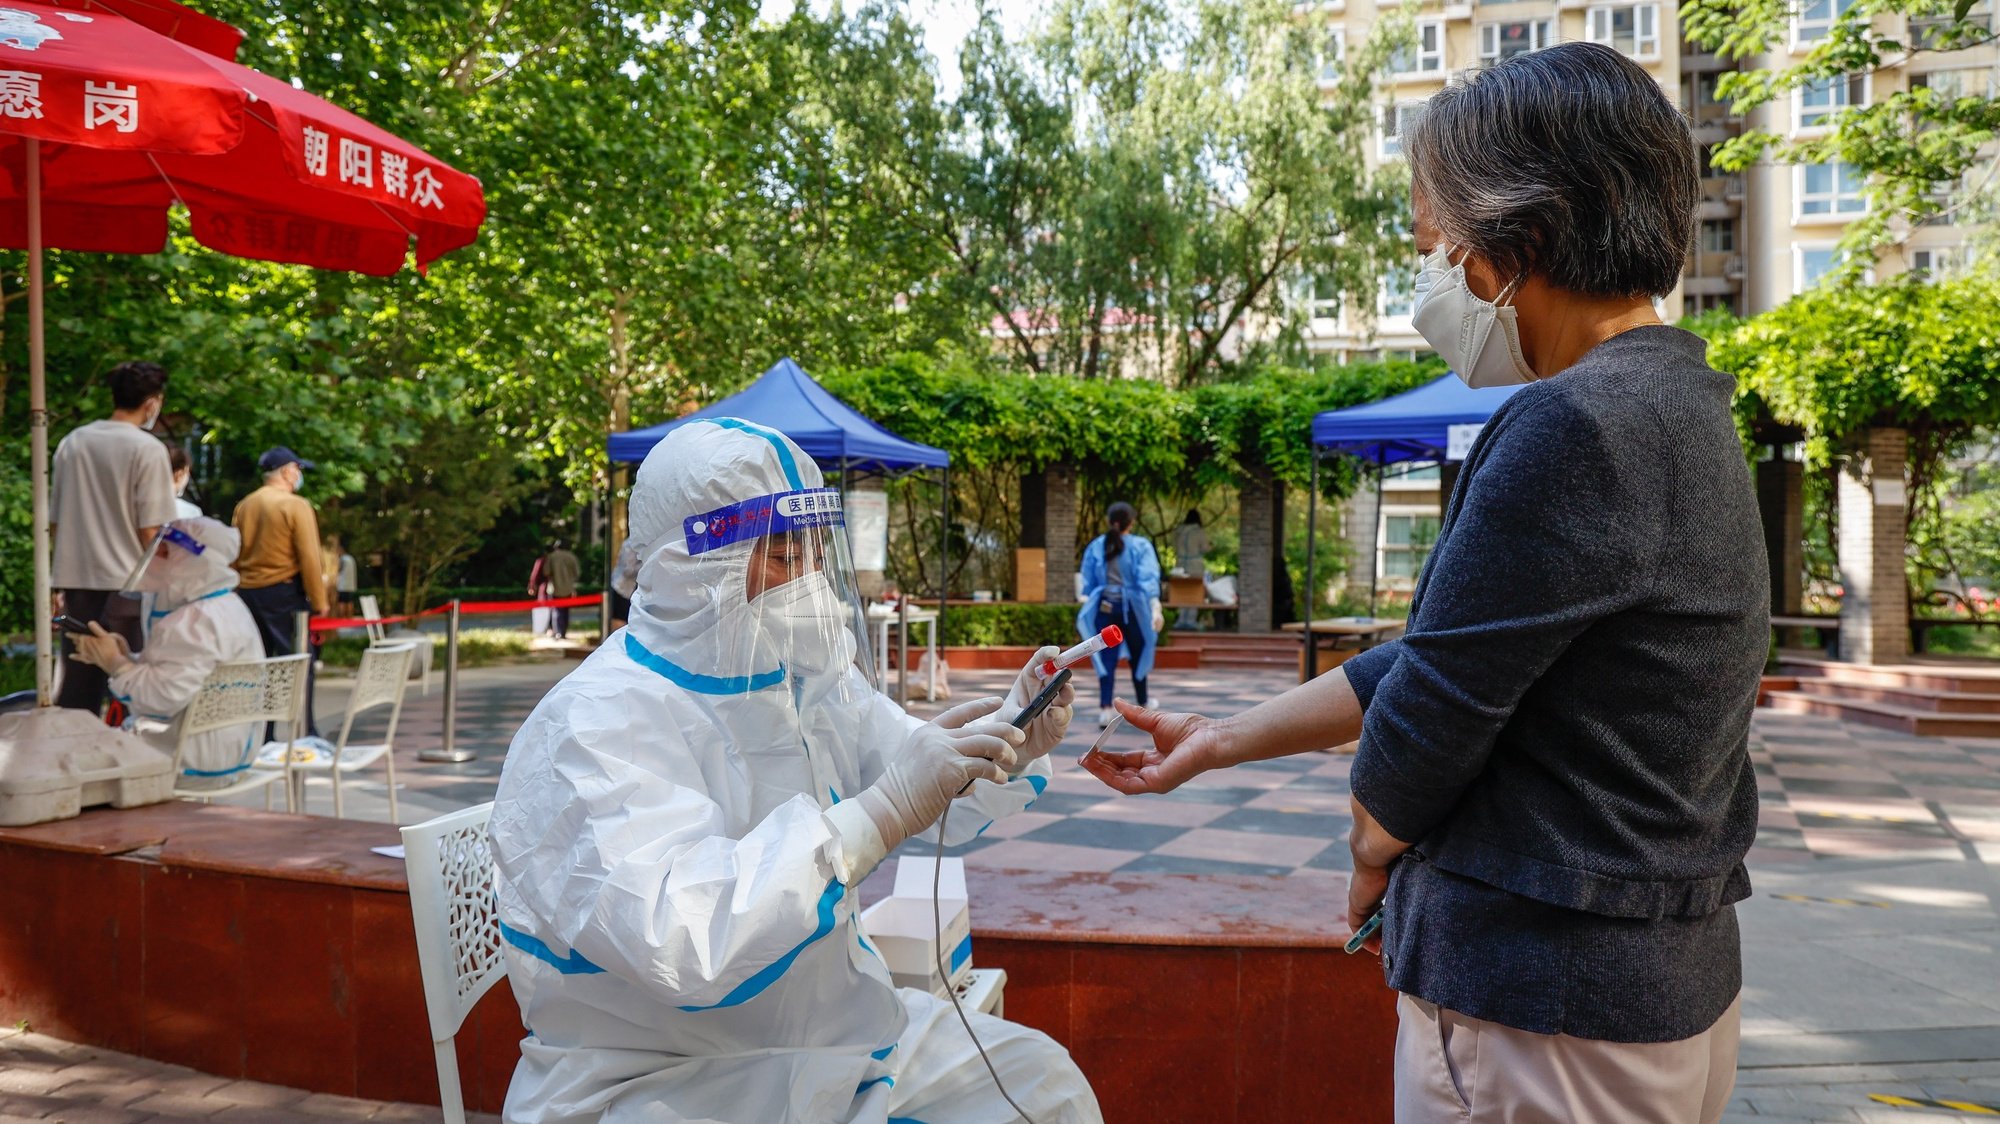 epa09950453 A health worker in protective suit takes a picture of a woman&#039;s ID at a COVID-19 test site in Beijing, China, 16 May 2022. Beijing continues its mass testing as part of its effort to curb the spread of COVID-19 in the city while authorities in Shanghai announced a relaxed lockdown starting on 01 June 2022. China&#039;s strict &#039;dynamic zero-COVID&#039; strategy has dragged its economy into the lowest level of consumption and industrial production since early 2020 as authorities have imposed partial and full lockdowns in different cities across the country.  EPA/MARK R. CRISTINO